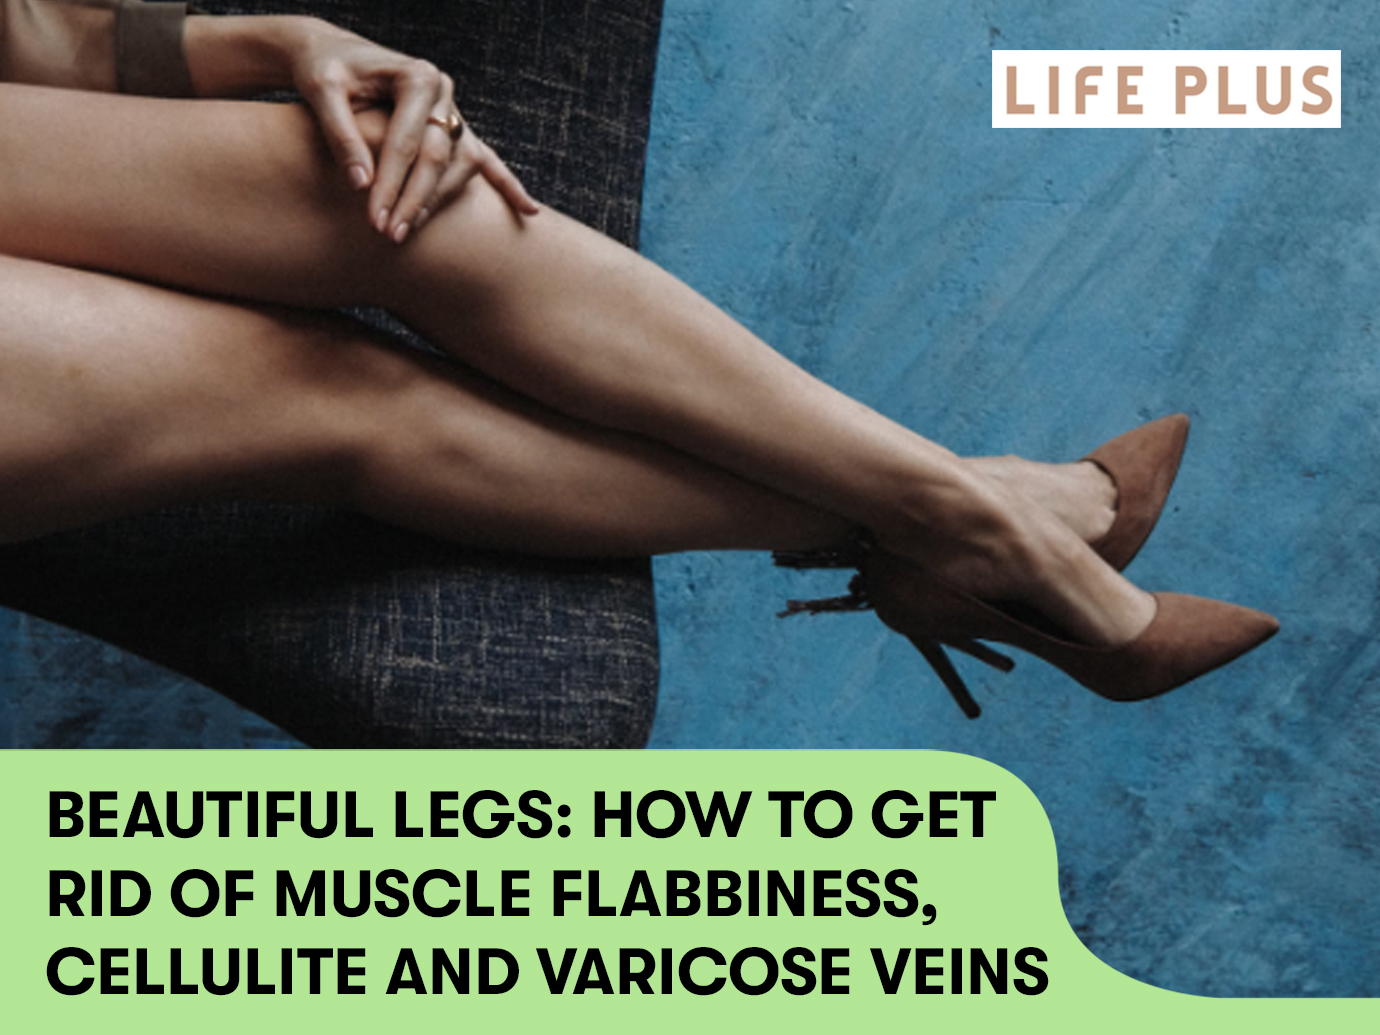 BEAUTIFUL LEGS: HOW TO GET RID OF MUSCLE FLABBINESS, CELLULITE AND VARICOSE VEINS